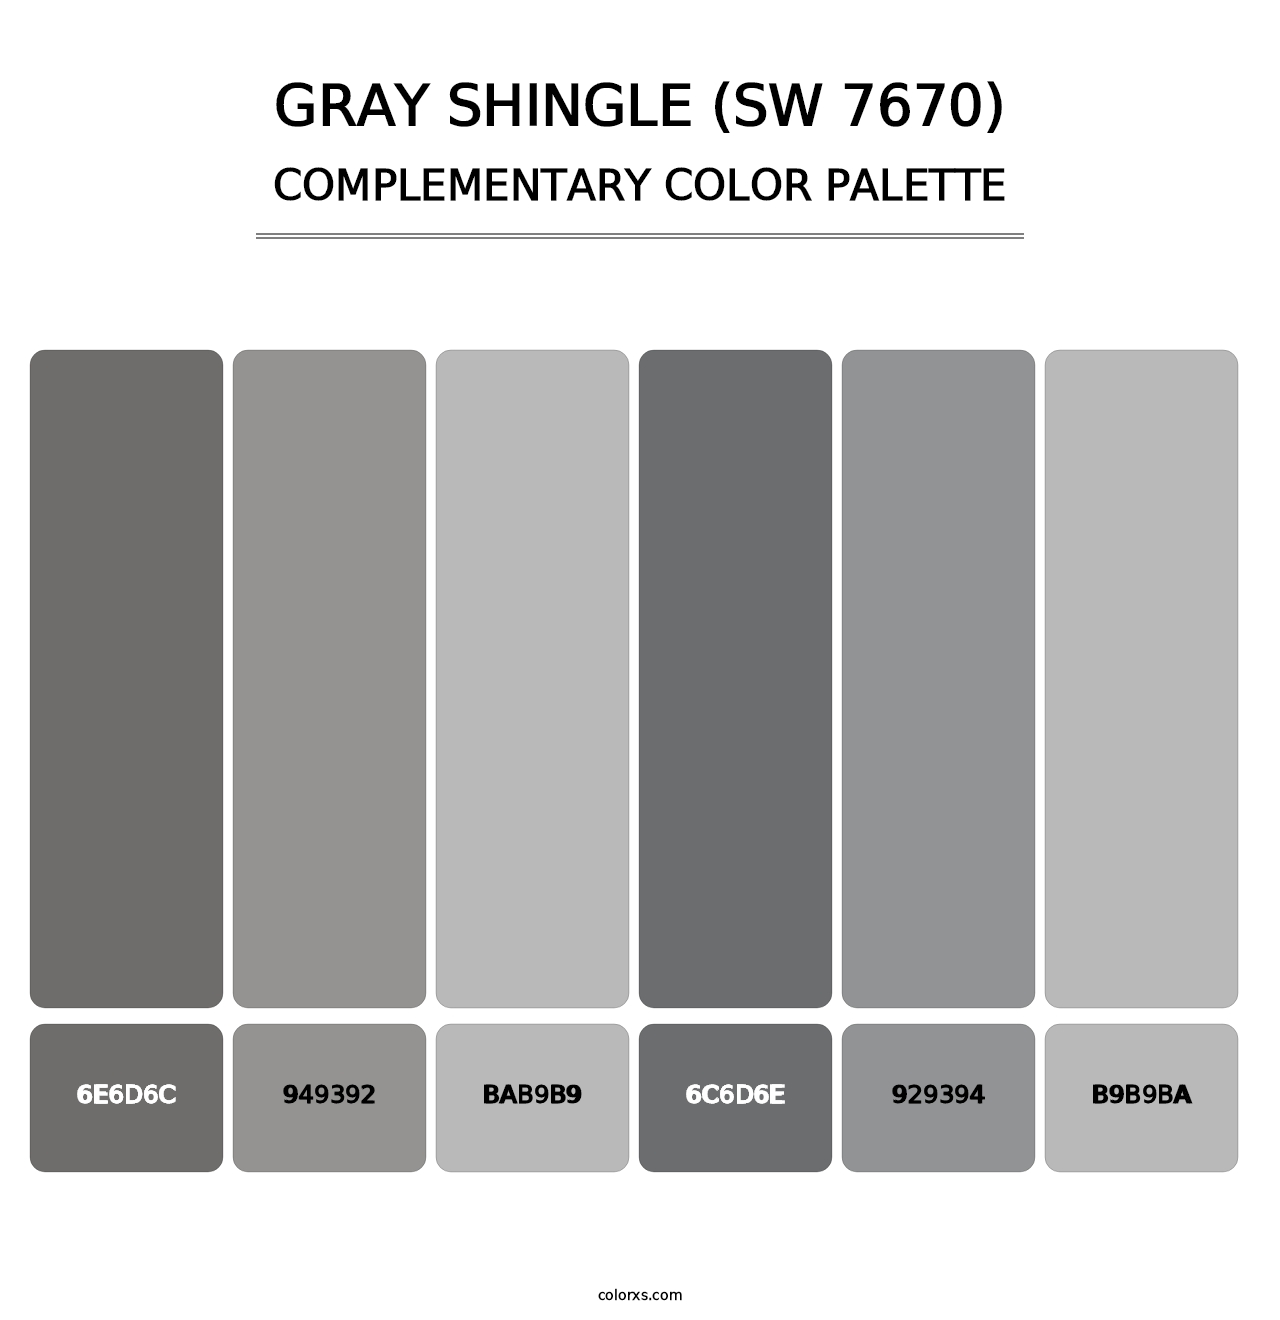 Gray Shingle (SW 7670) - Complementary Color Palette